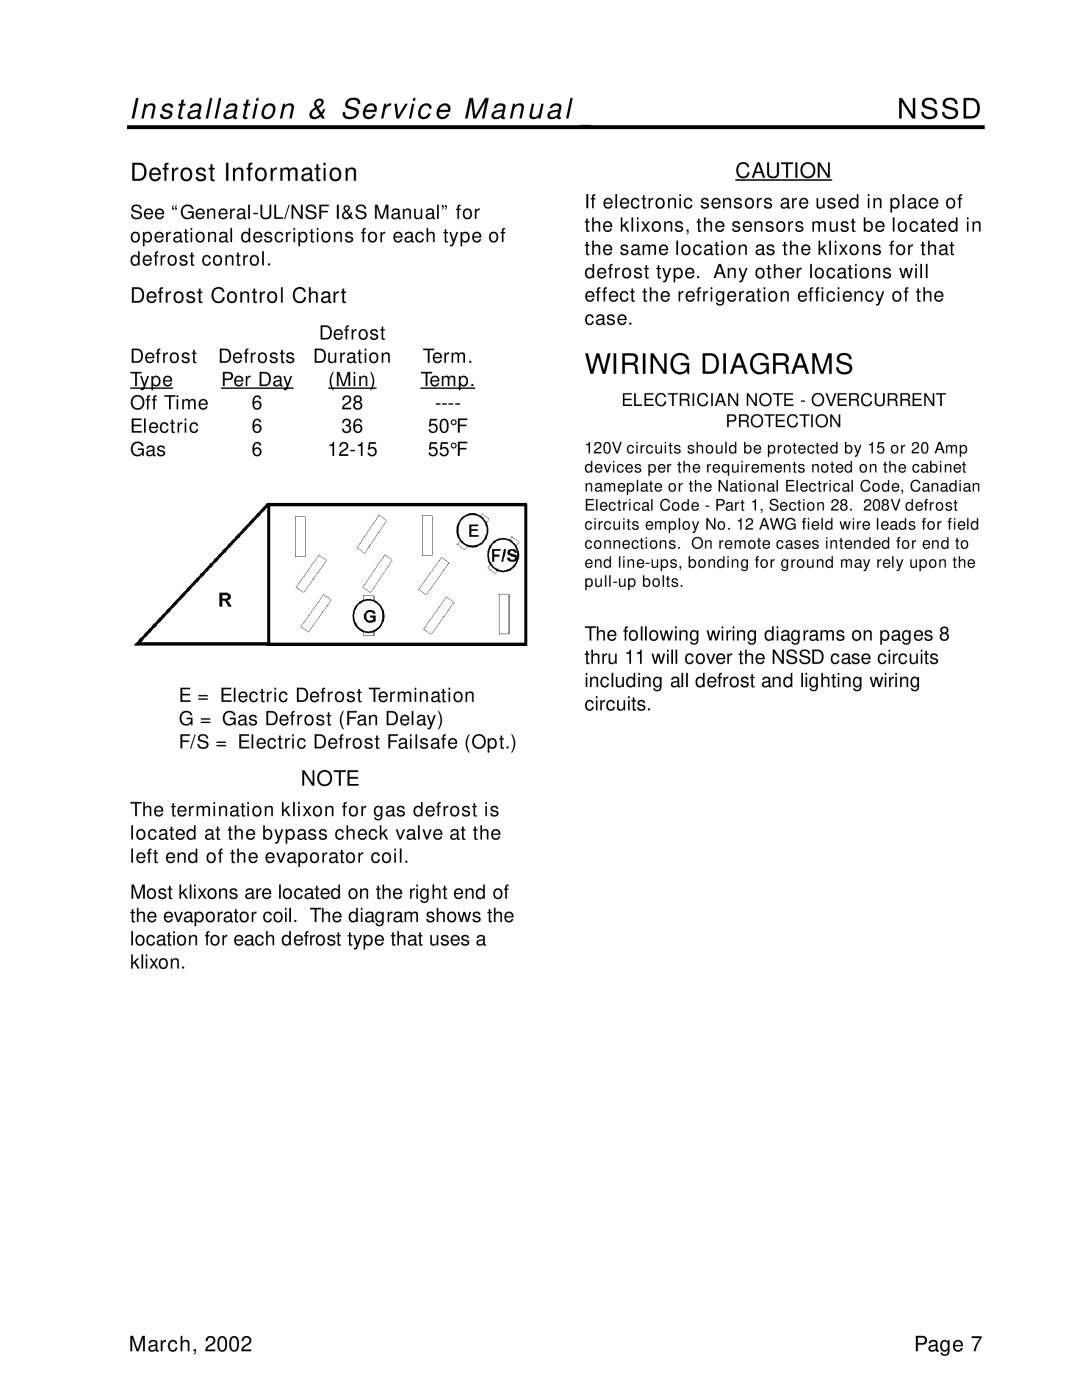 Tyler Refrigeration NSSD service manual Wiring Diagrams, Nssd, Defrost Information 